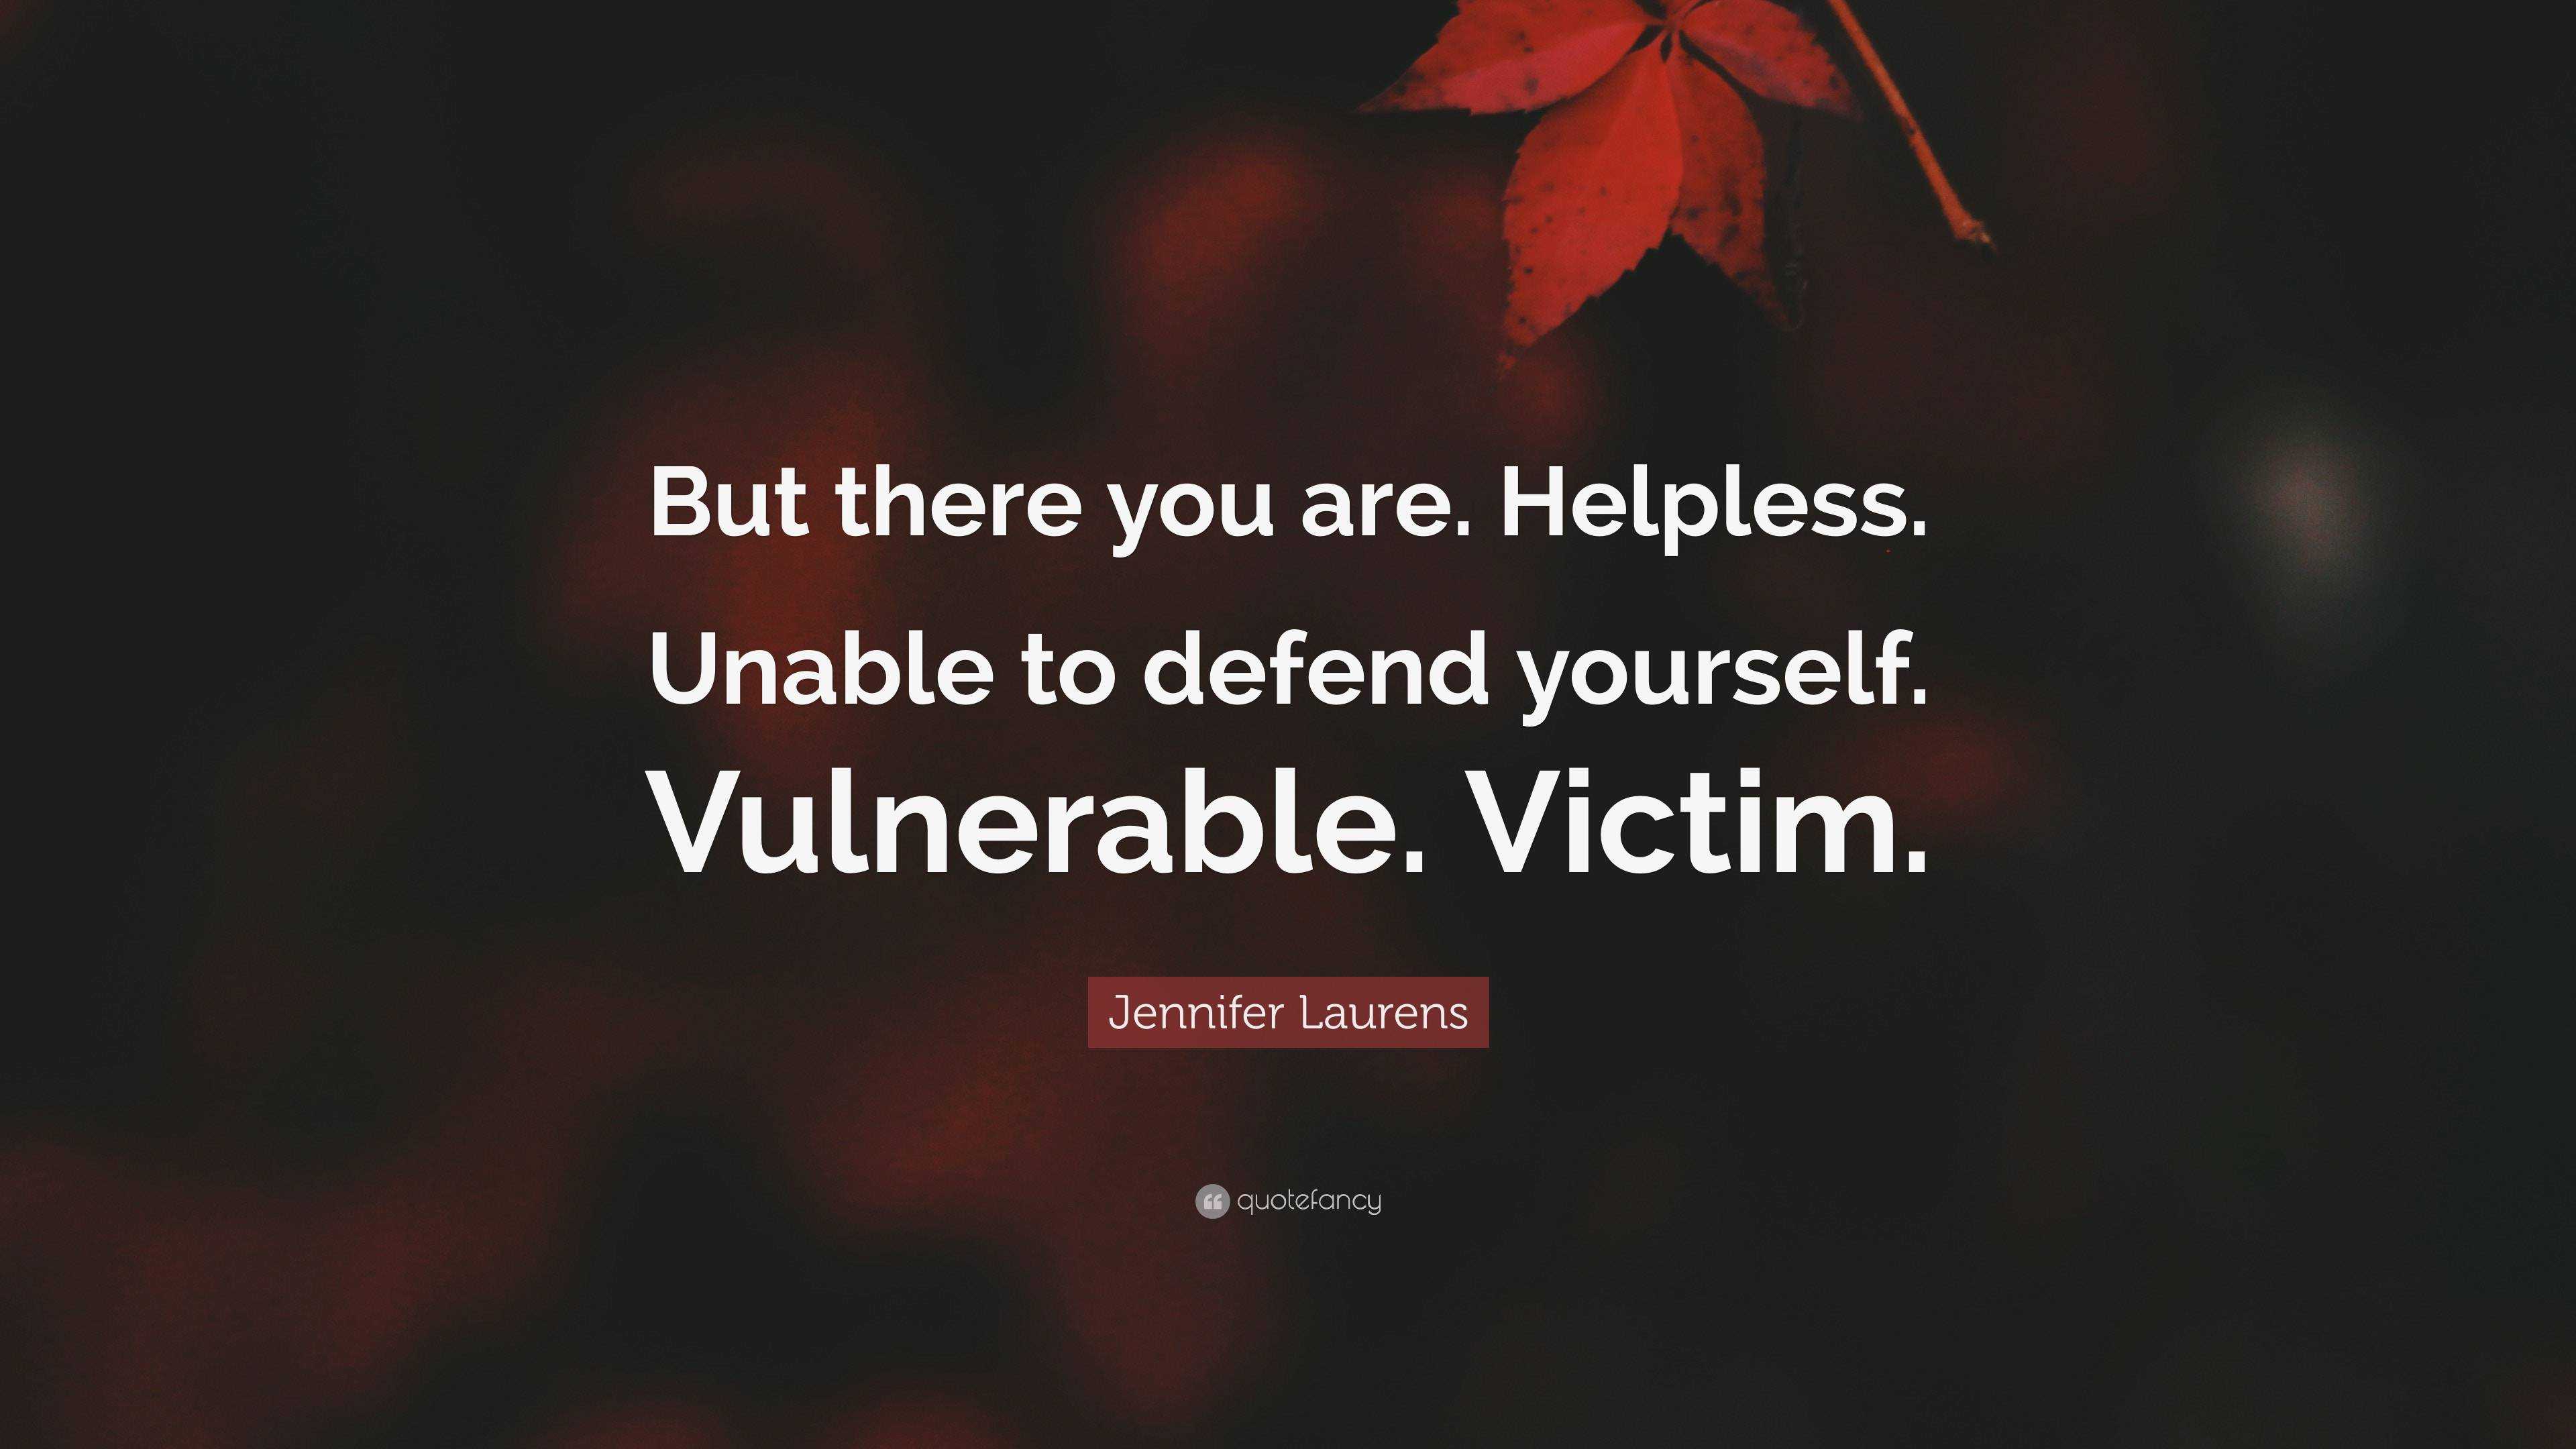 Jennifer Laurens Quote: “But there you are. Helpless. Unable to defend ...